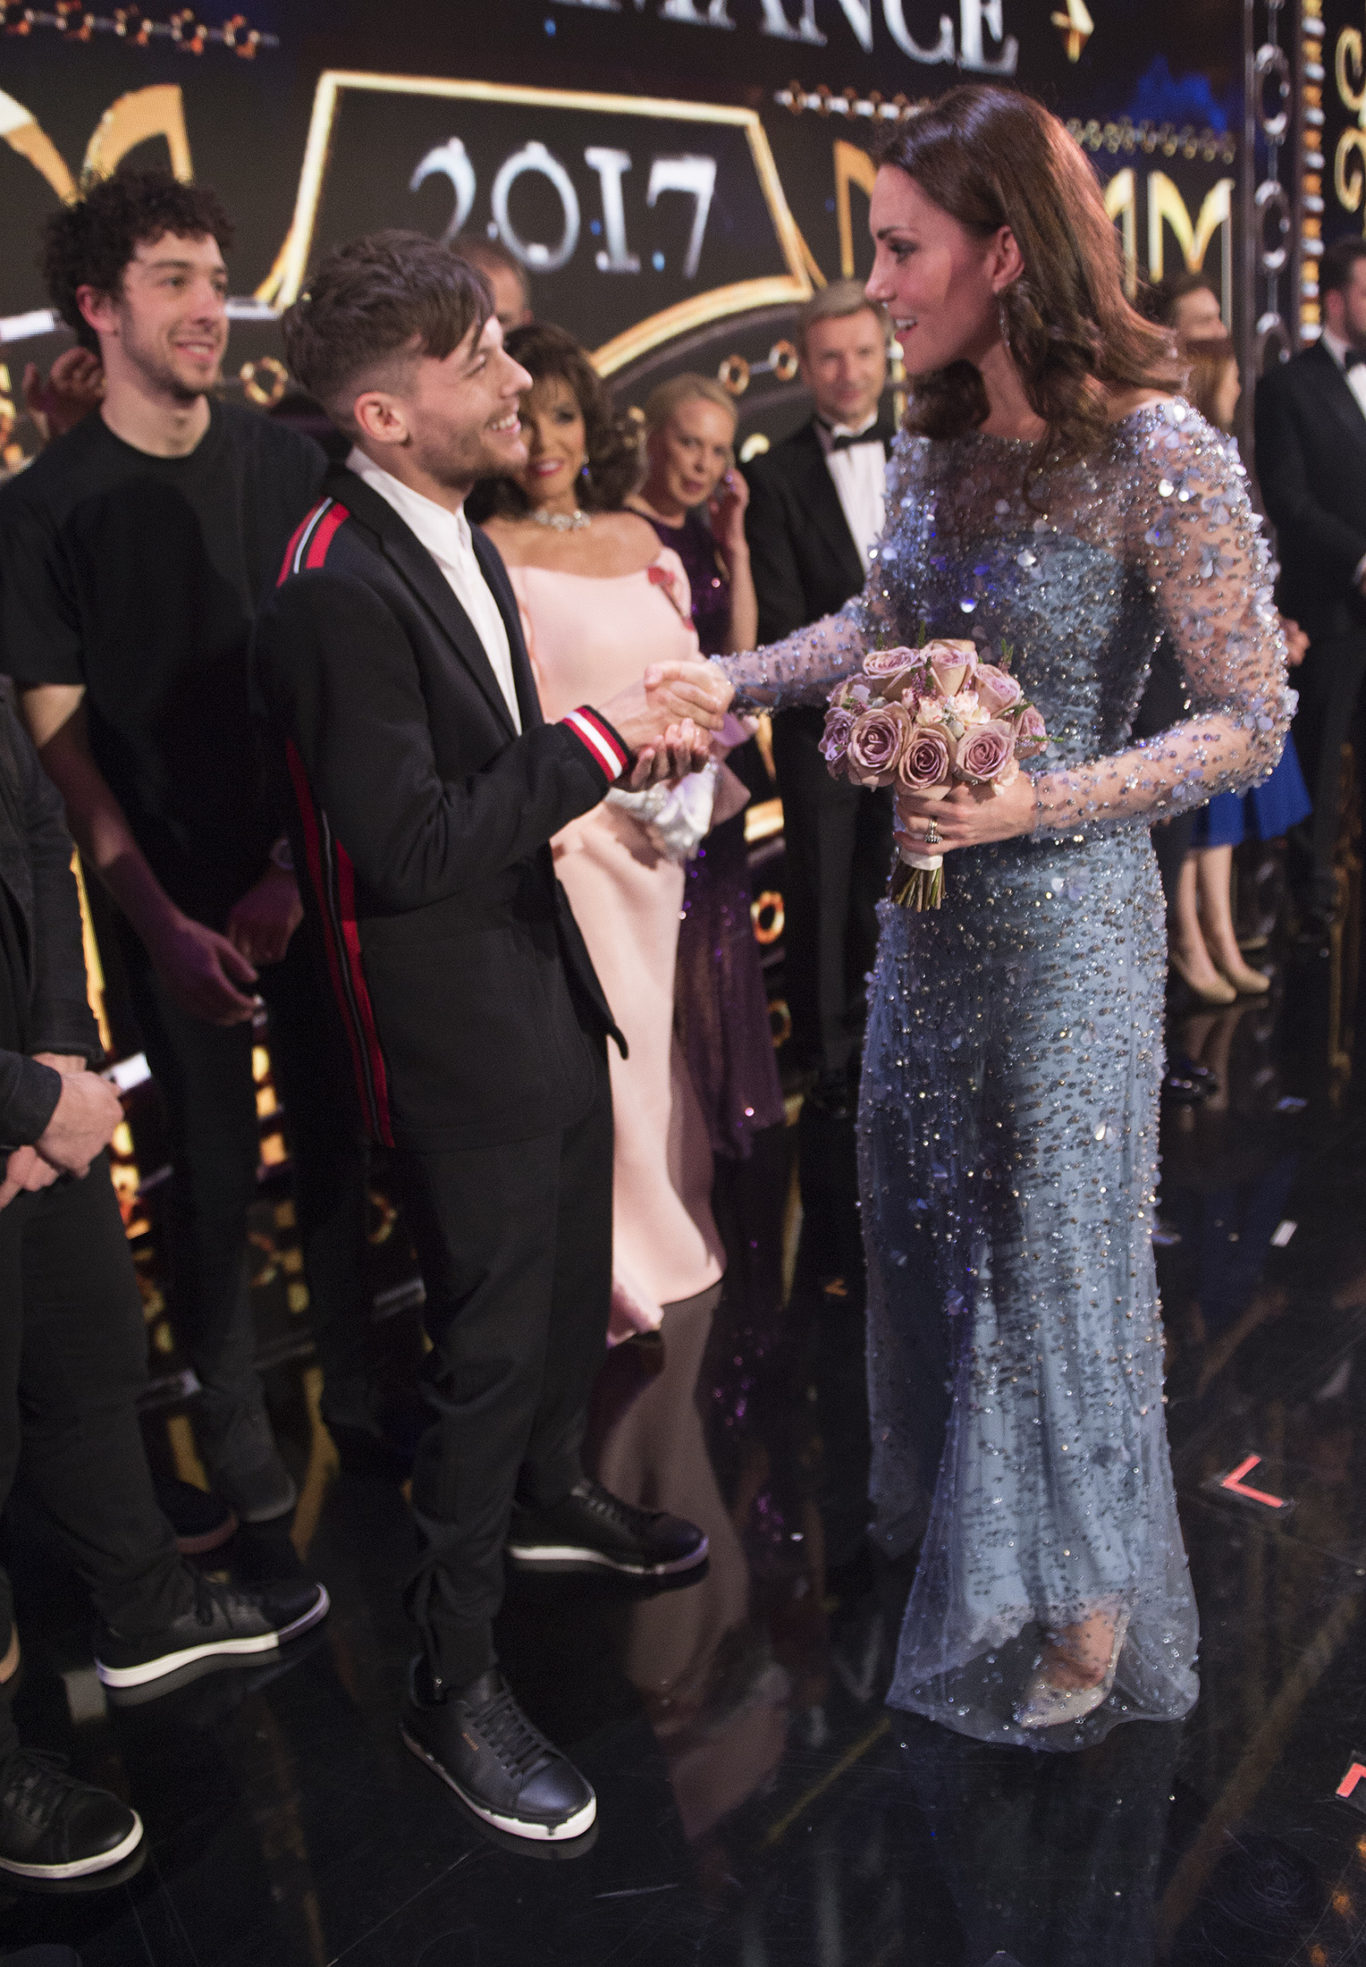 Louis Tomlinson and the Duchess of Cambridge at the Royal Variety Performance